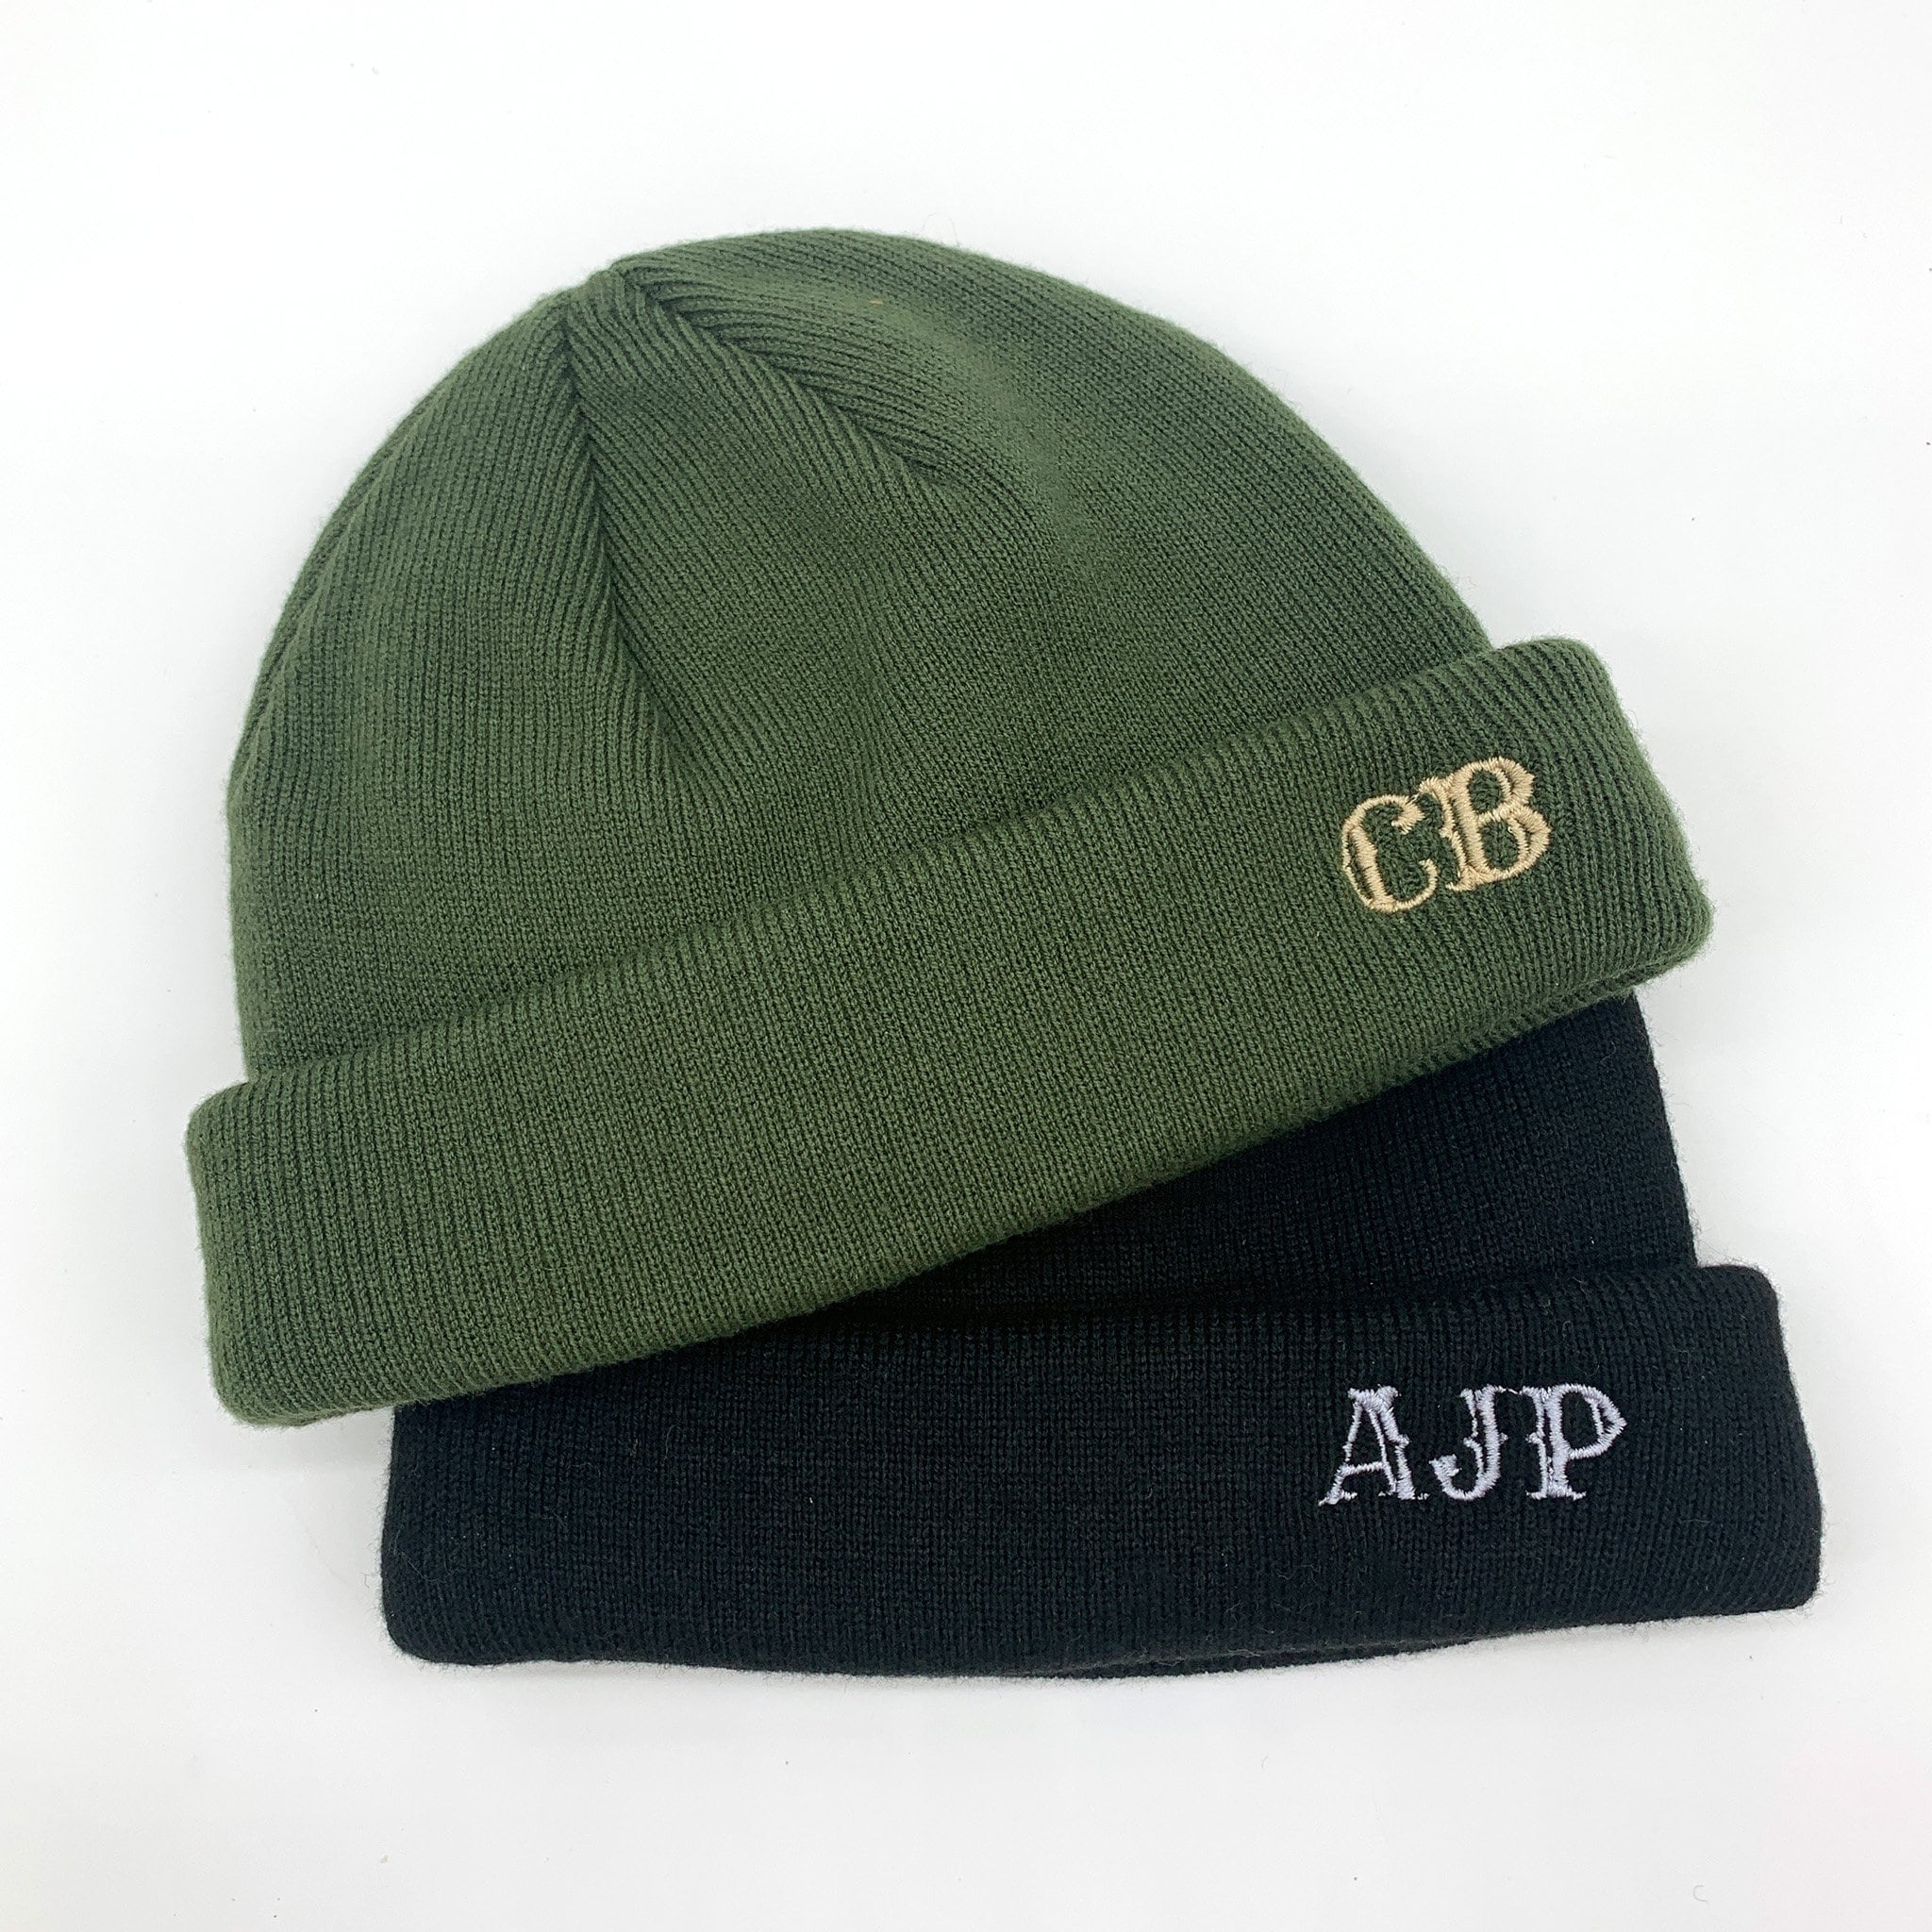 Custom Beanies Made Easy: Tips for Finding a Reliable Beanie Maker